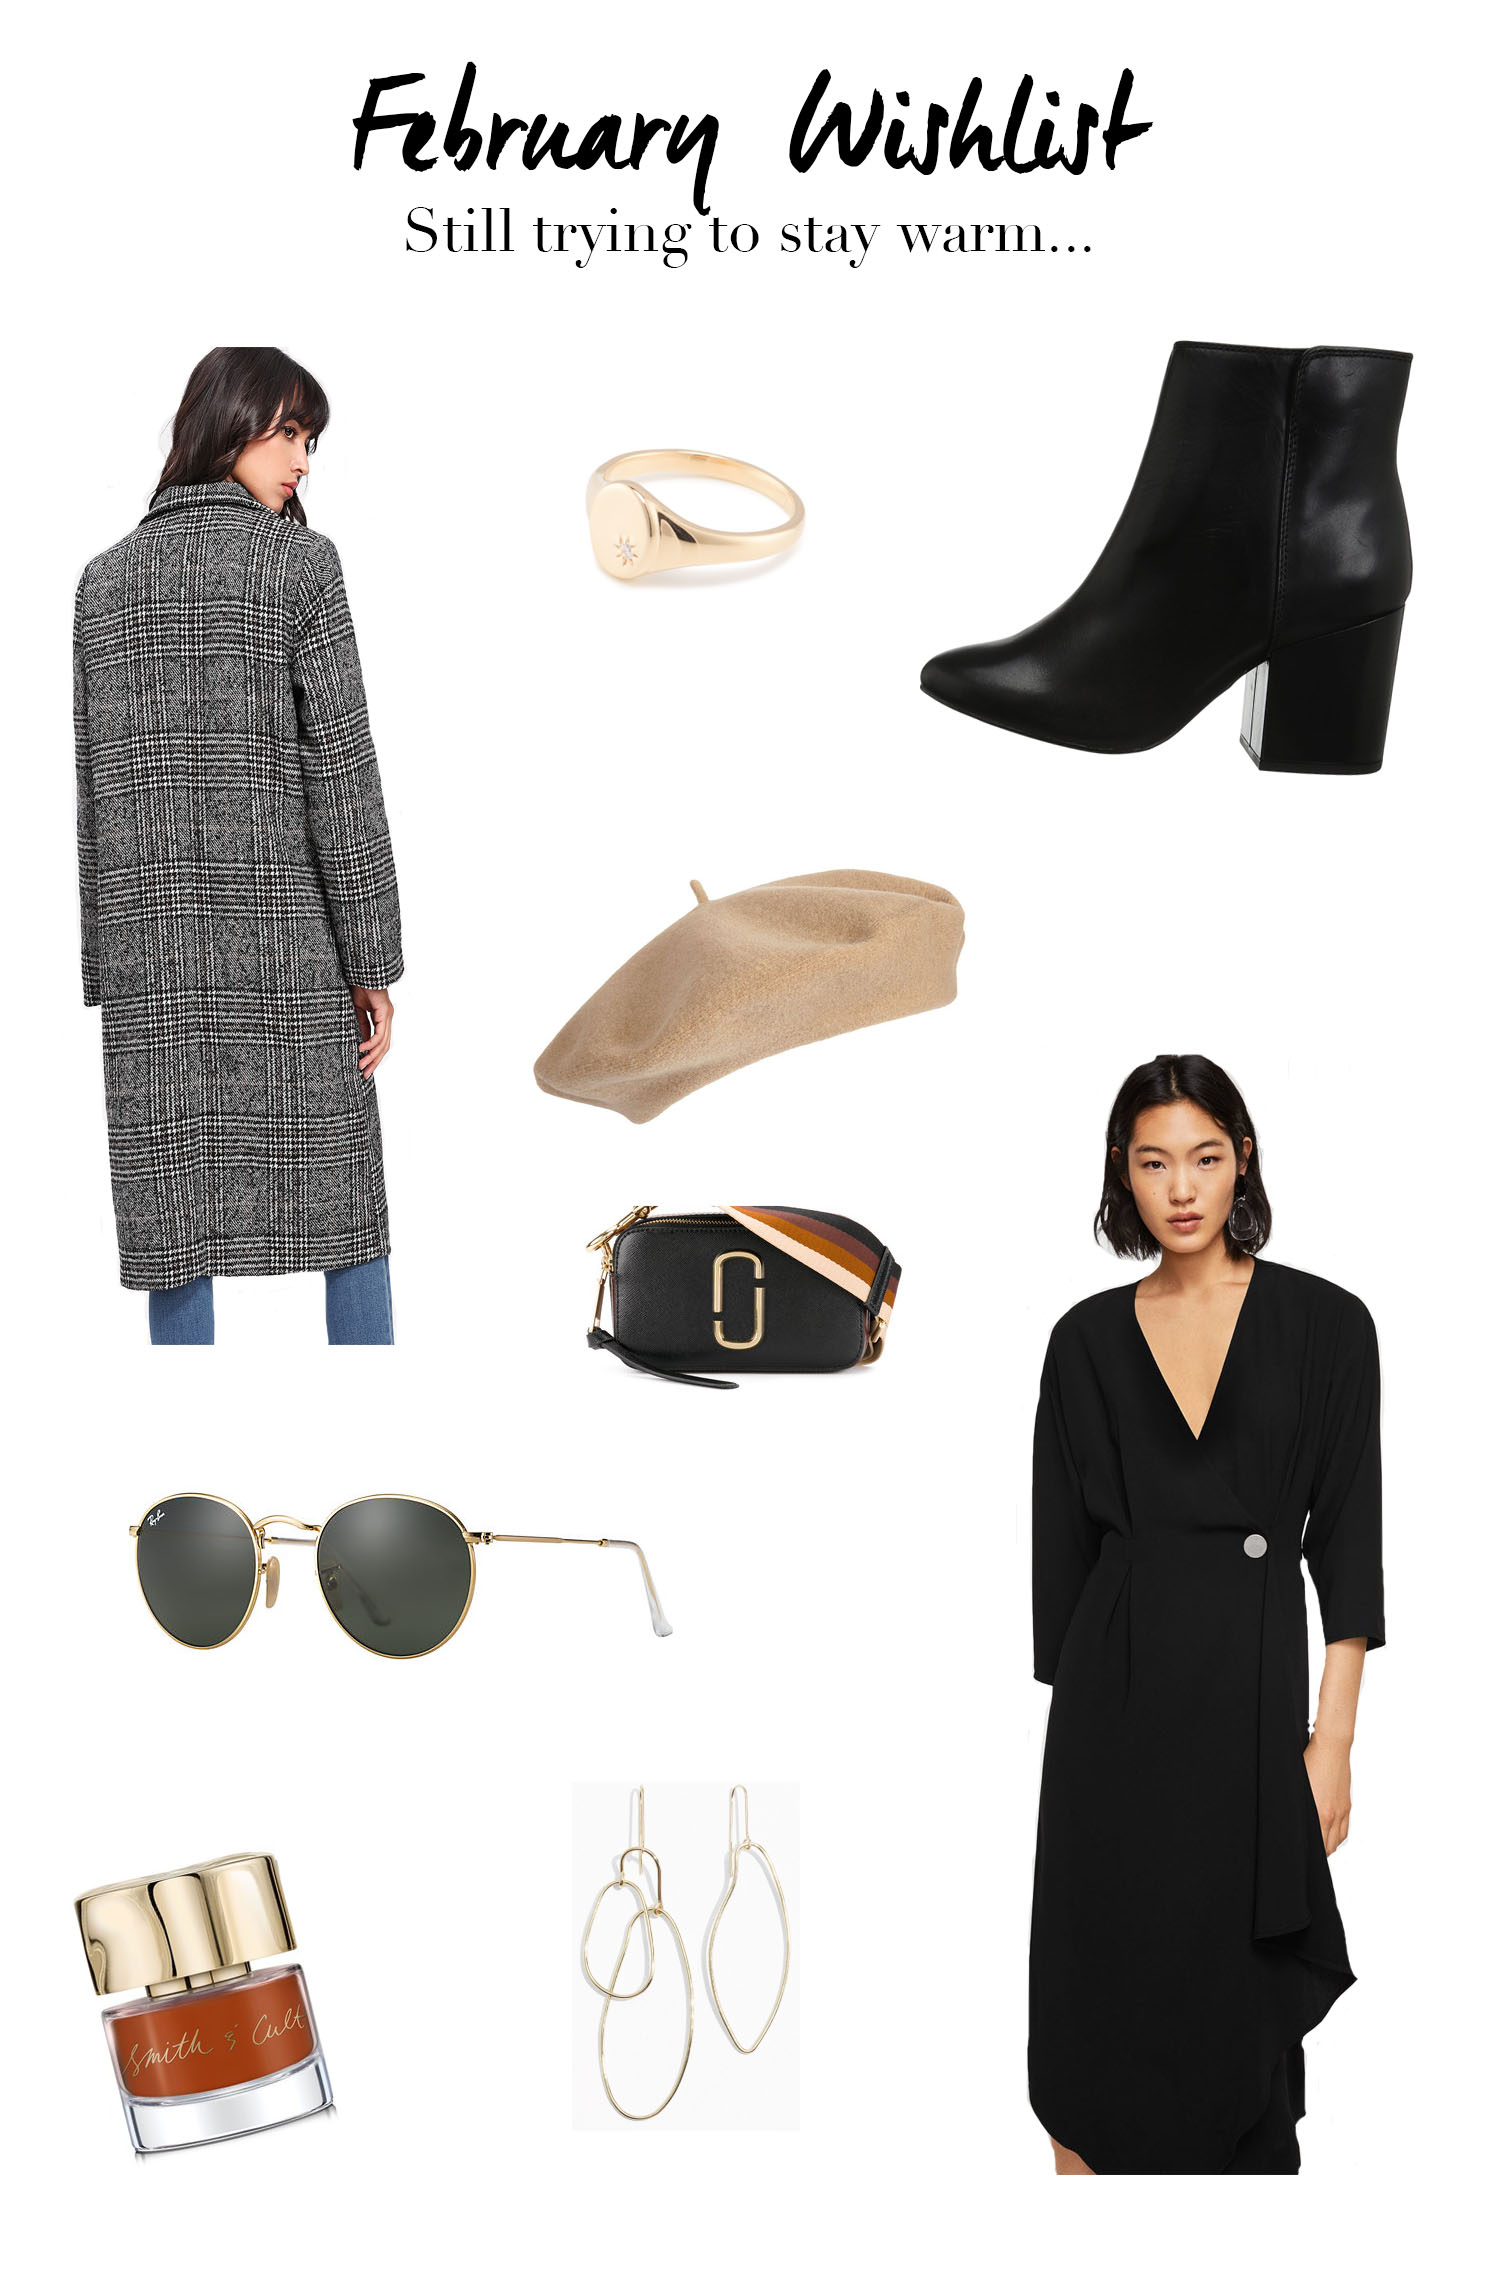 A February shopping list compiled by fashion blogger Cee Fardoe of Coco & Vera, featuring a Marc Jacobs snapshot bag, Aldo Masen boots and a Mejuri signet ring